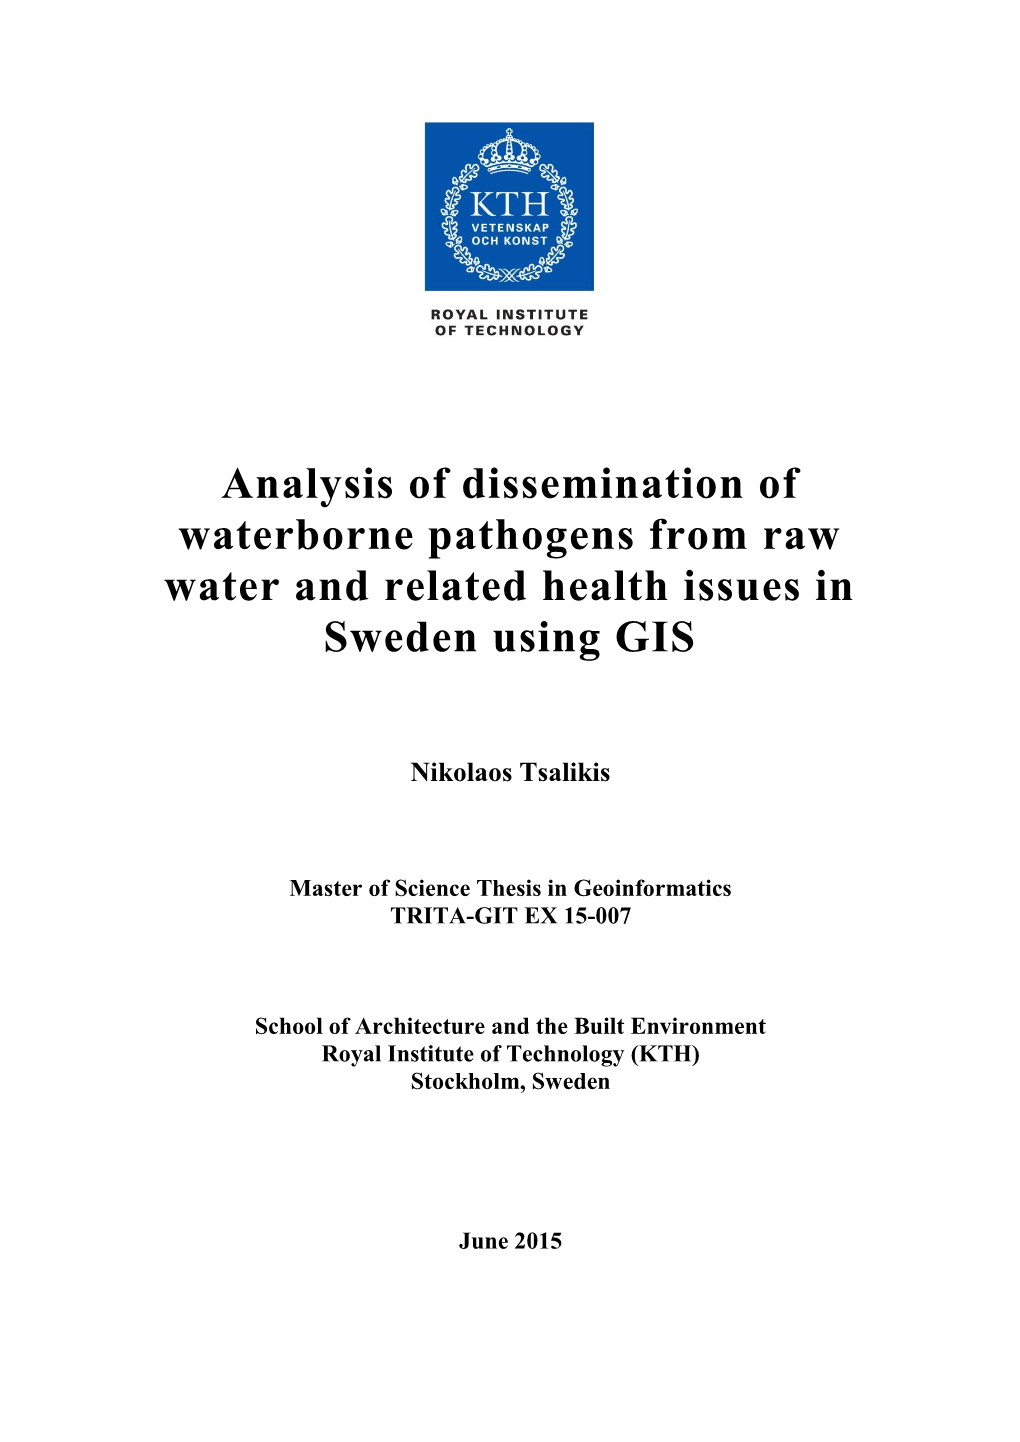 Analysis of Dissemination of Waterborne Pathogens from Raw Water and Related Health Issues in Sweden Using GIS